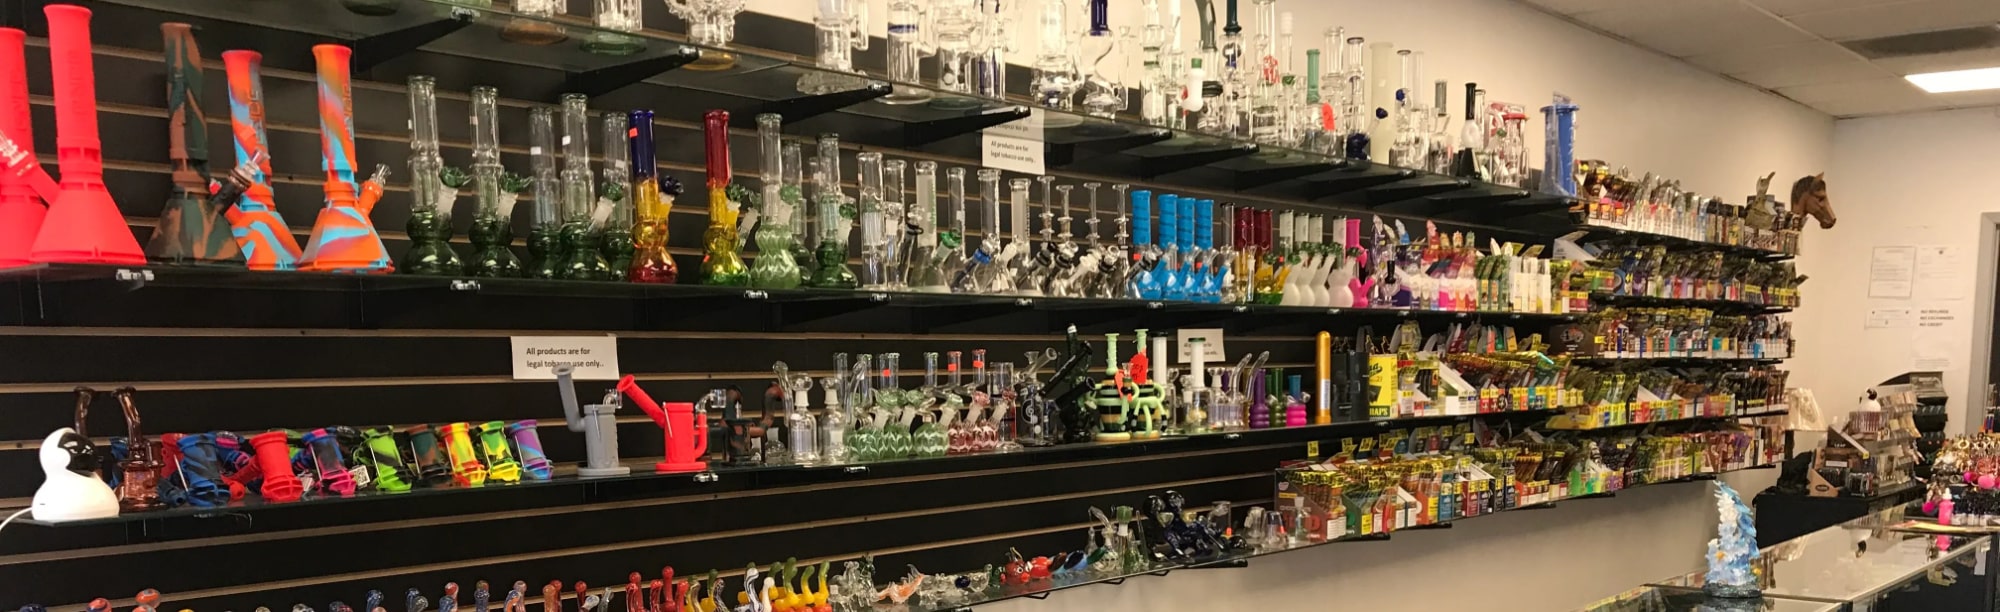 image of mr tobacco & vapor in raleigh nc